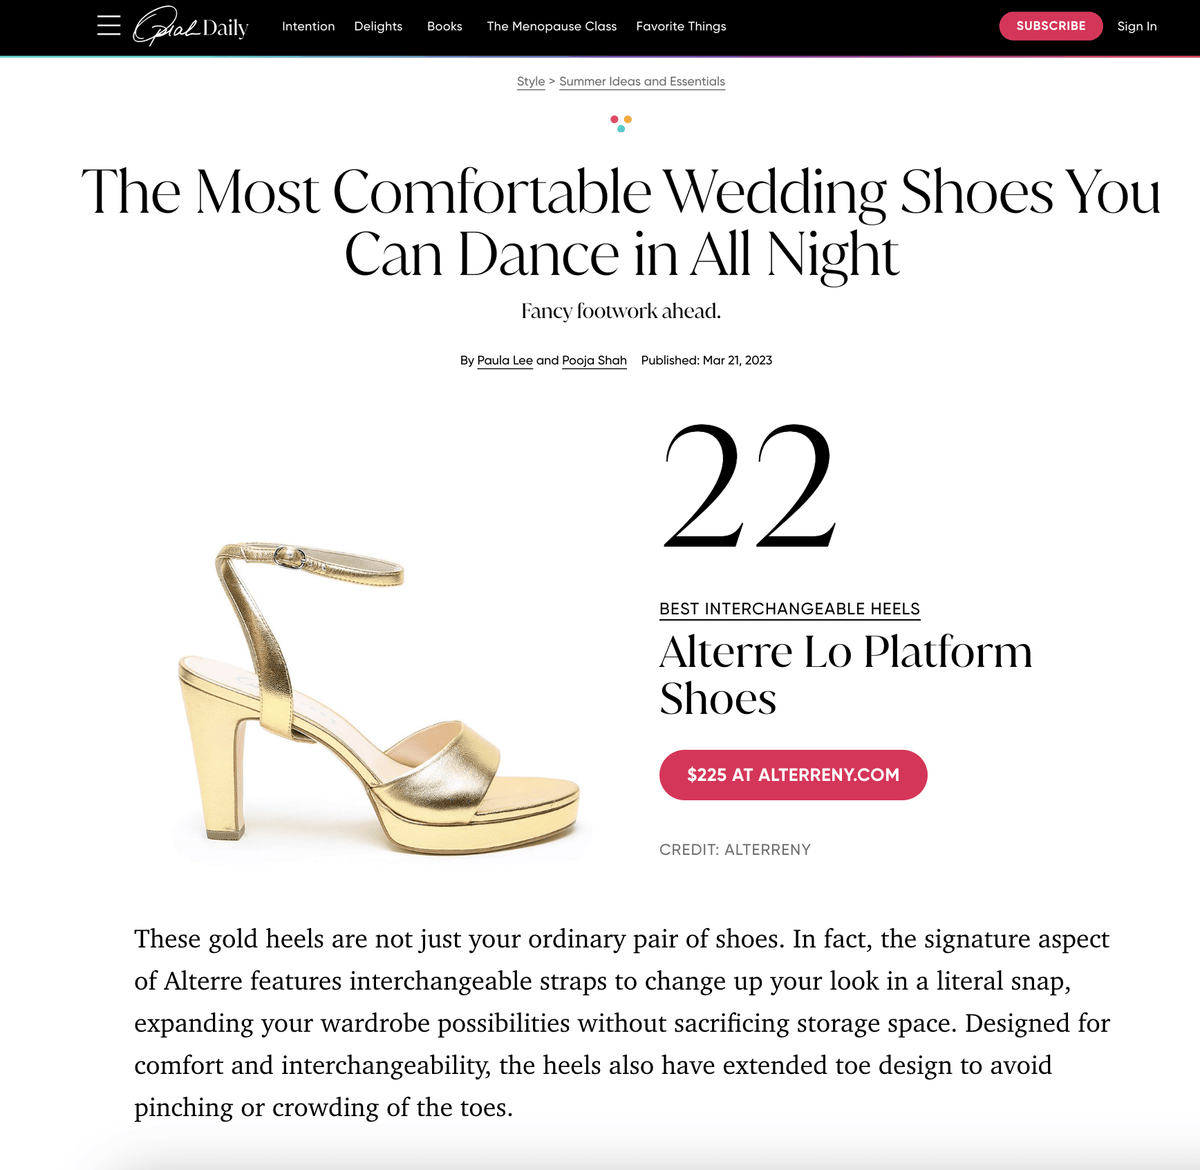 Alterre shoes featured on Oprah Daily - Customizable Gold Platform Heels